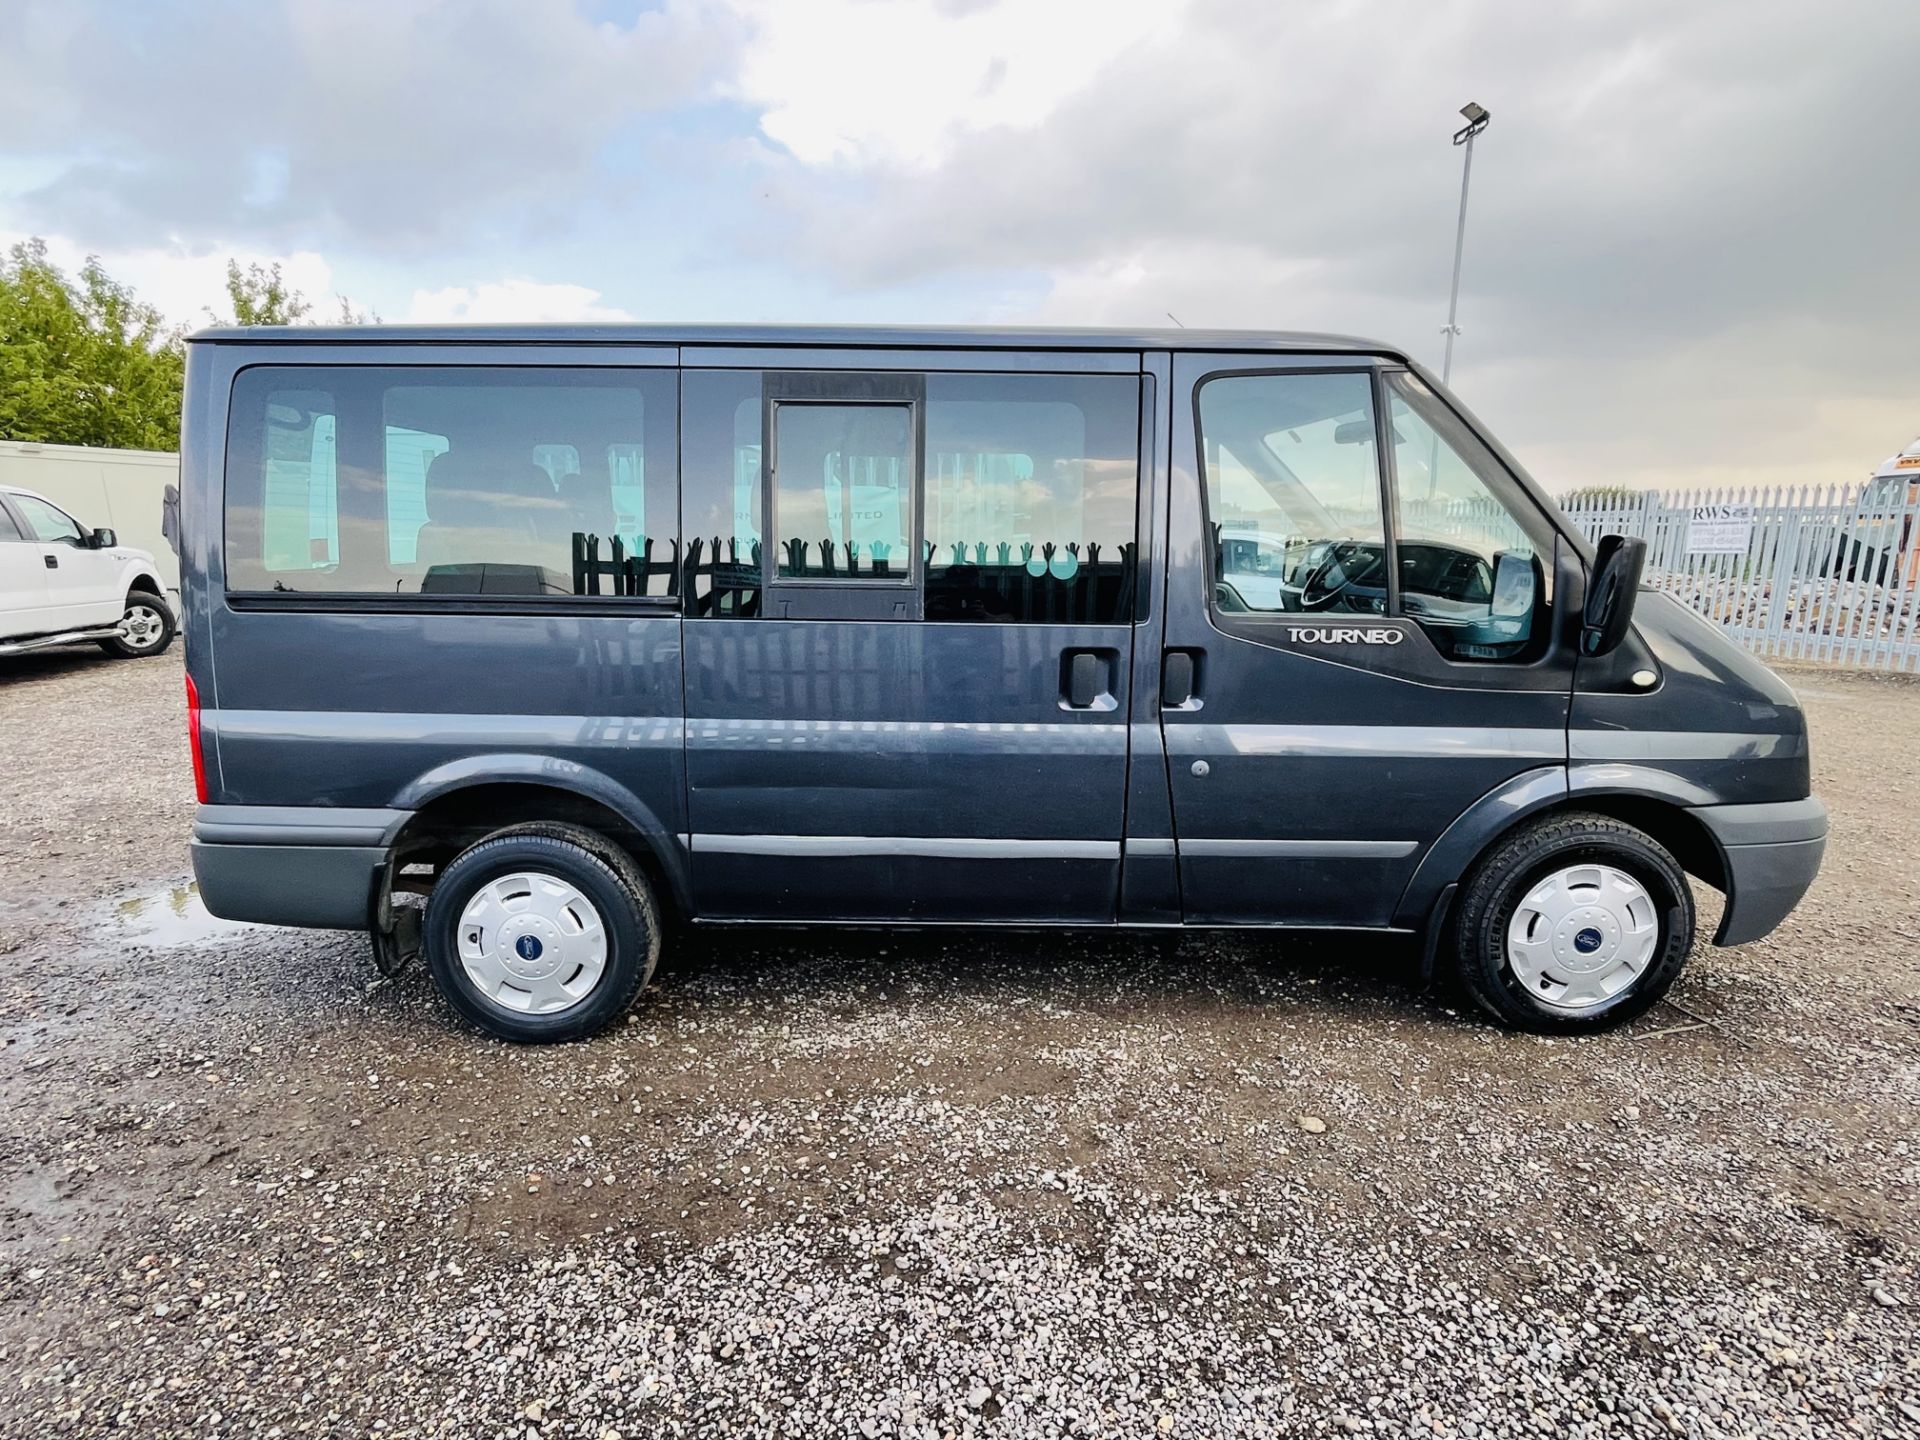 ** ON SALE ** Ford Transit 2.2 TDCI Toureno Trend 2009 '59 Reg' 9 seats -Air Con -Cruise Control - - Image 13 of 21